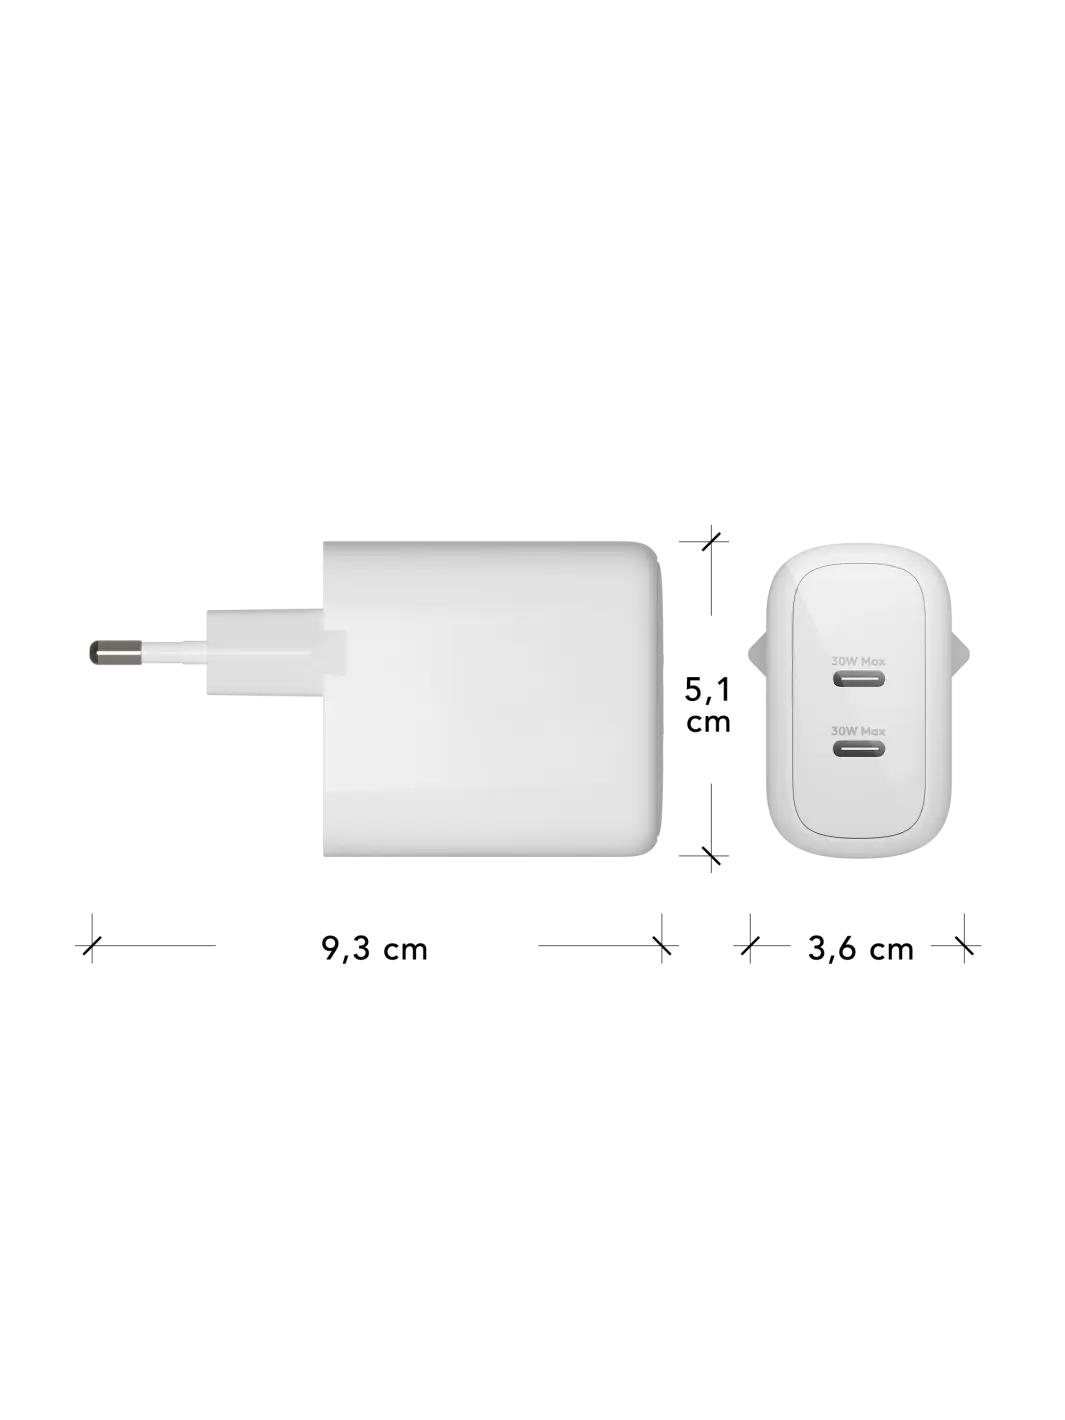 WALL CHARGERS S White 2x 30W 9,3 x 5,1 x 3,6 cm Wall chargers